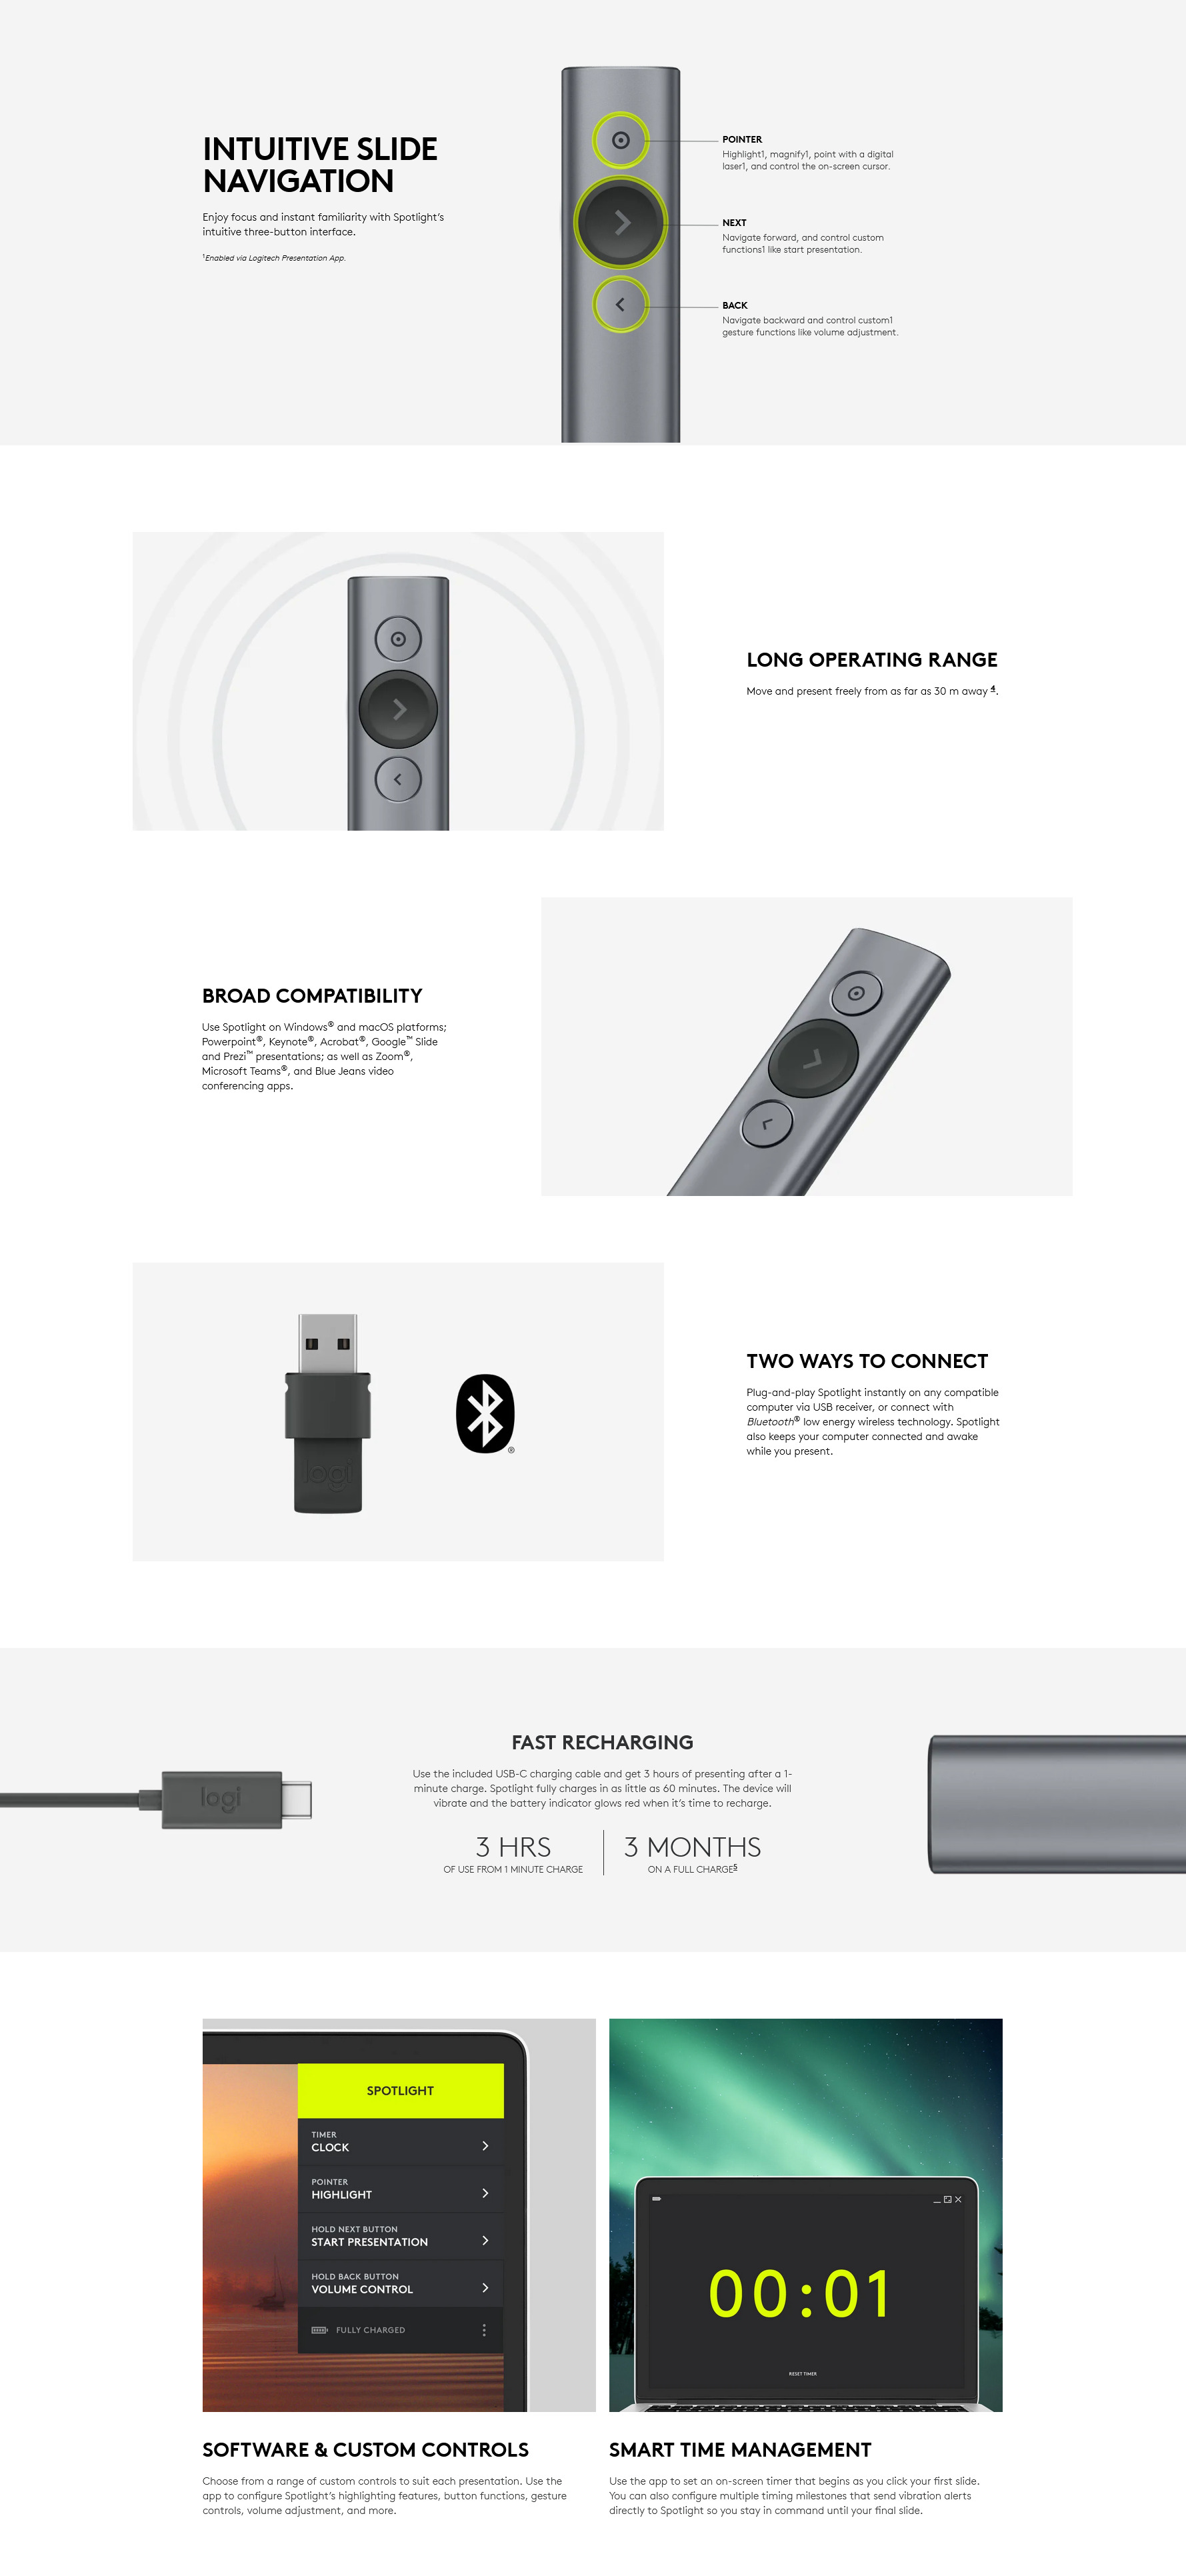 A large marketing image providing additional information about the product Logitech Spotlight - Wireless Presentation Remote (Gold) - Additional alt info not provided